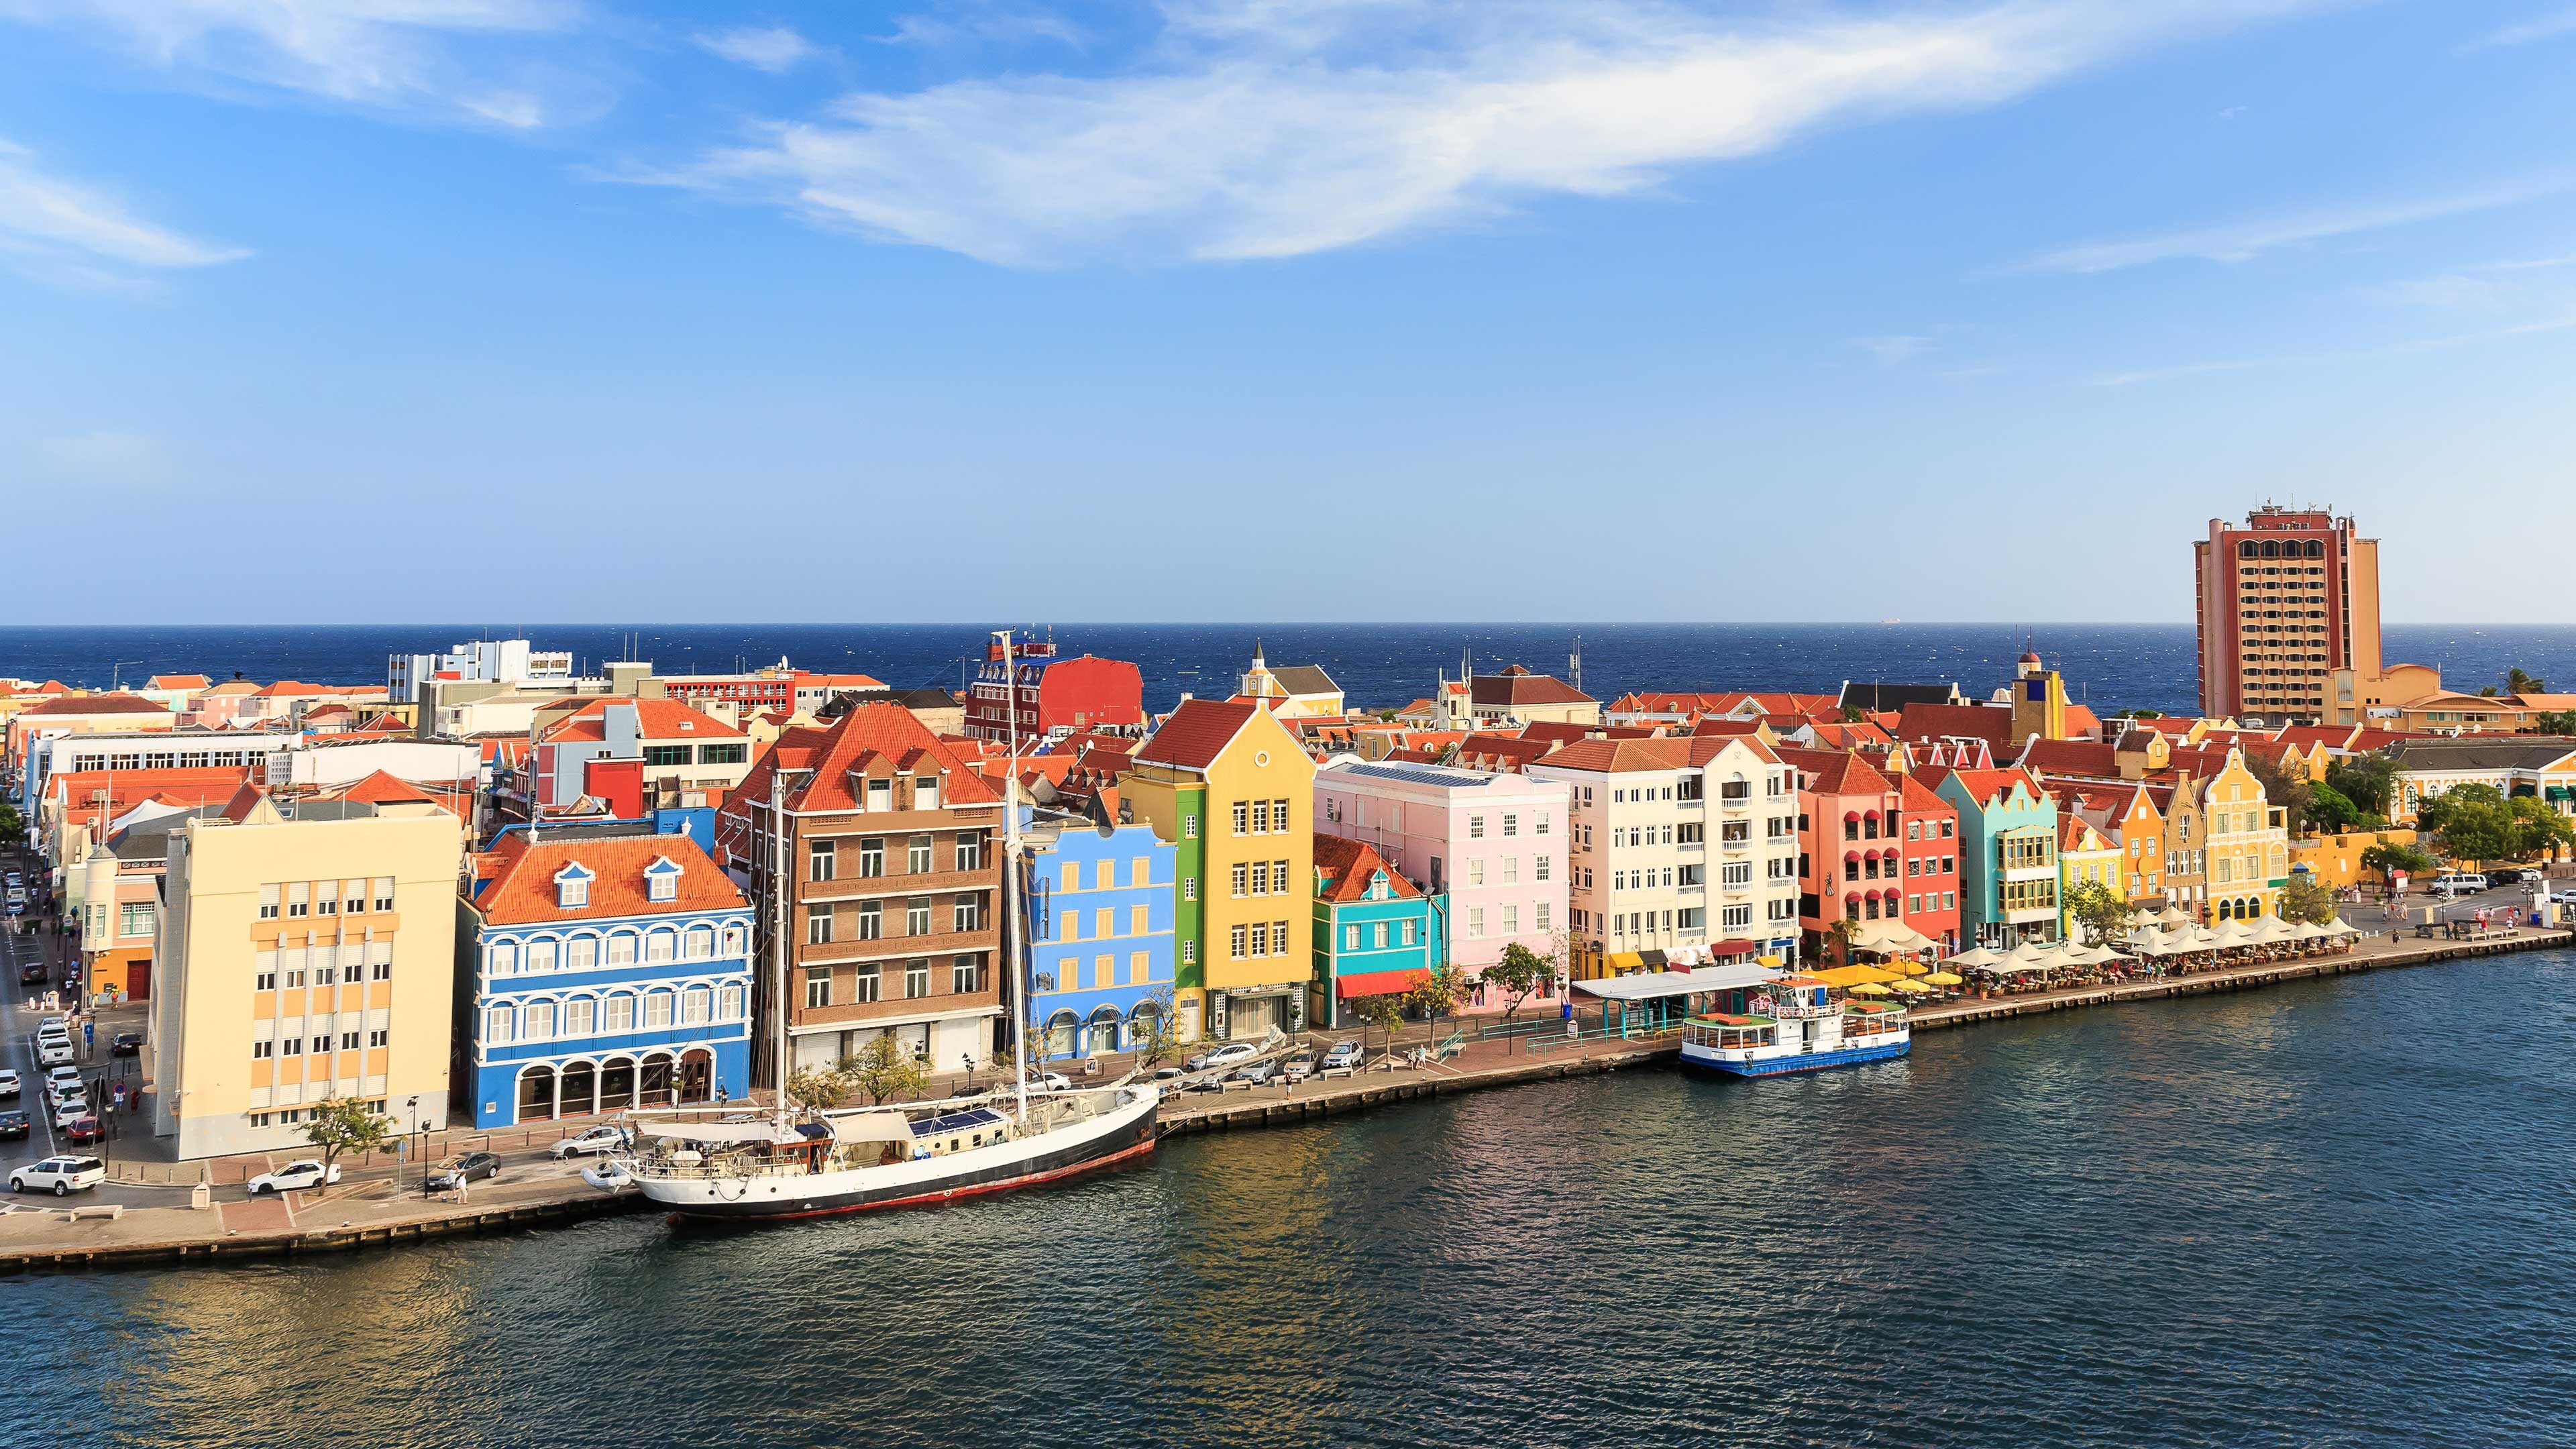 cruises arriving in curacao